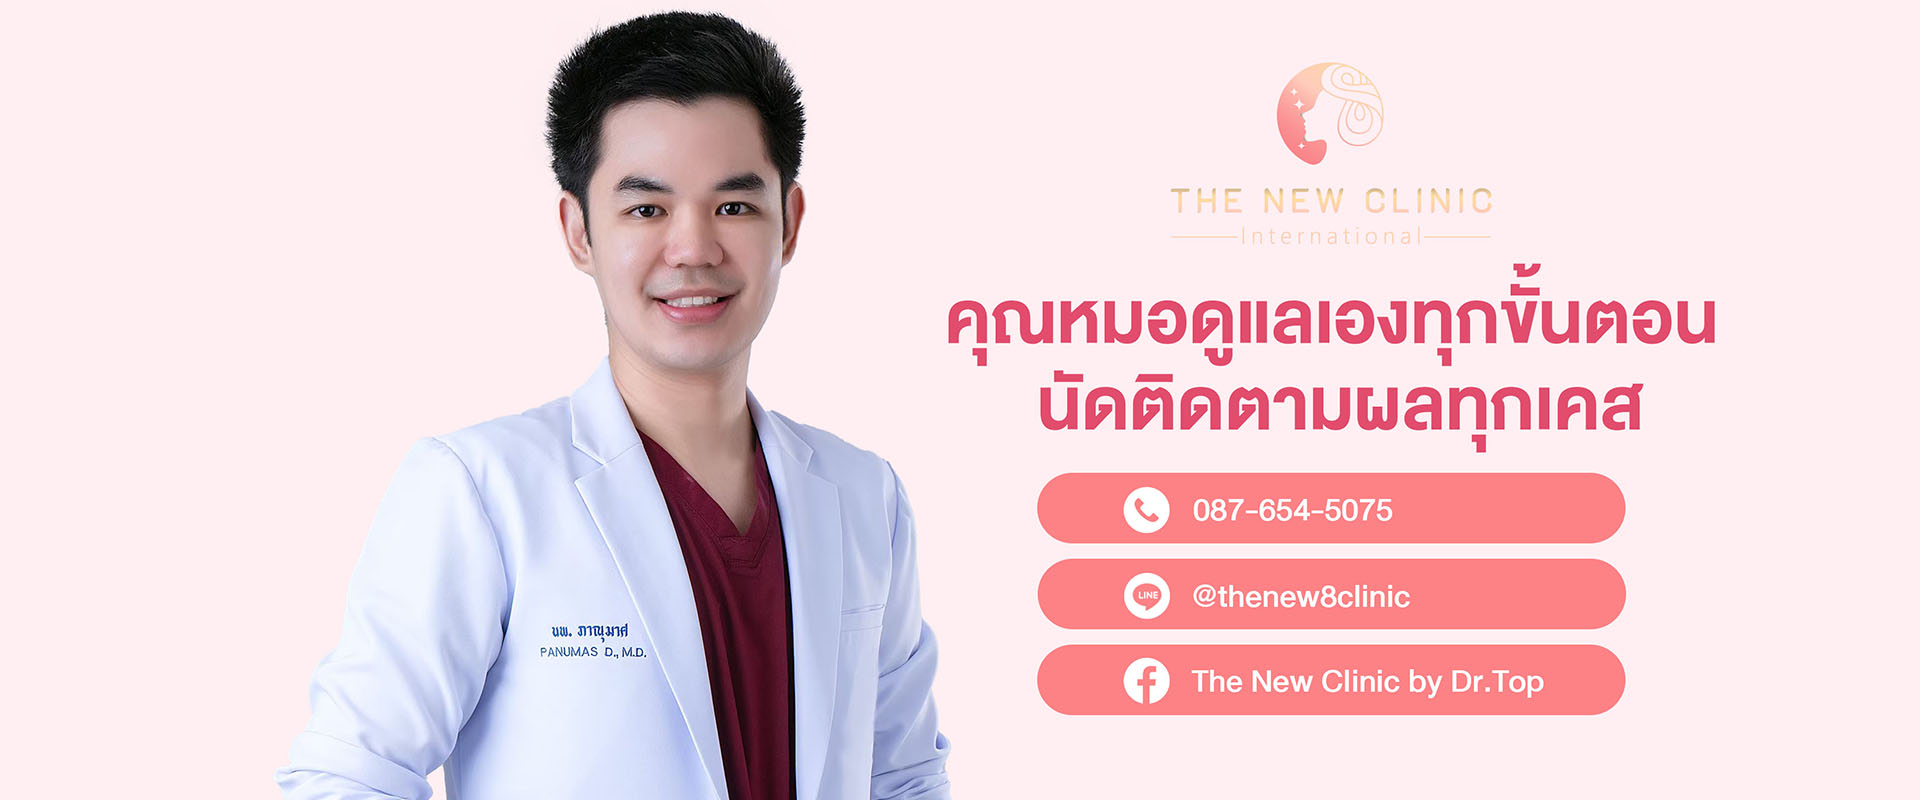 Graphic Website 1-5 - The New Clinic International - มินิมอล